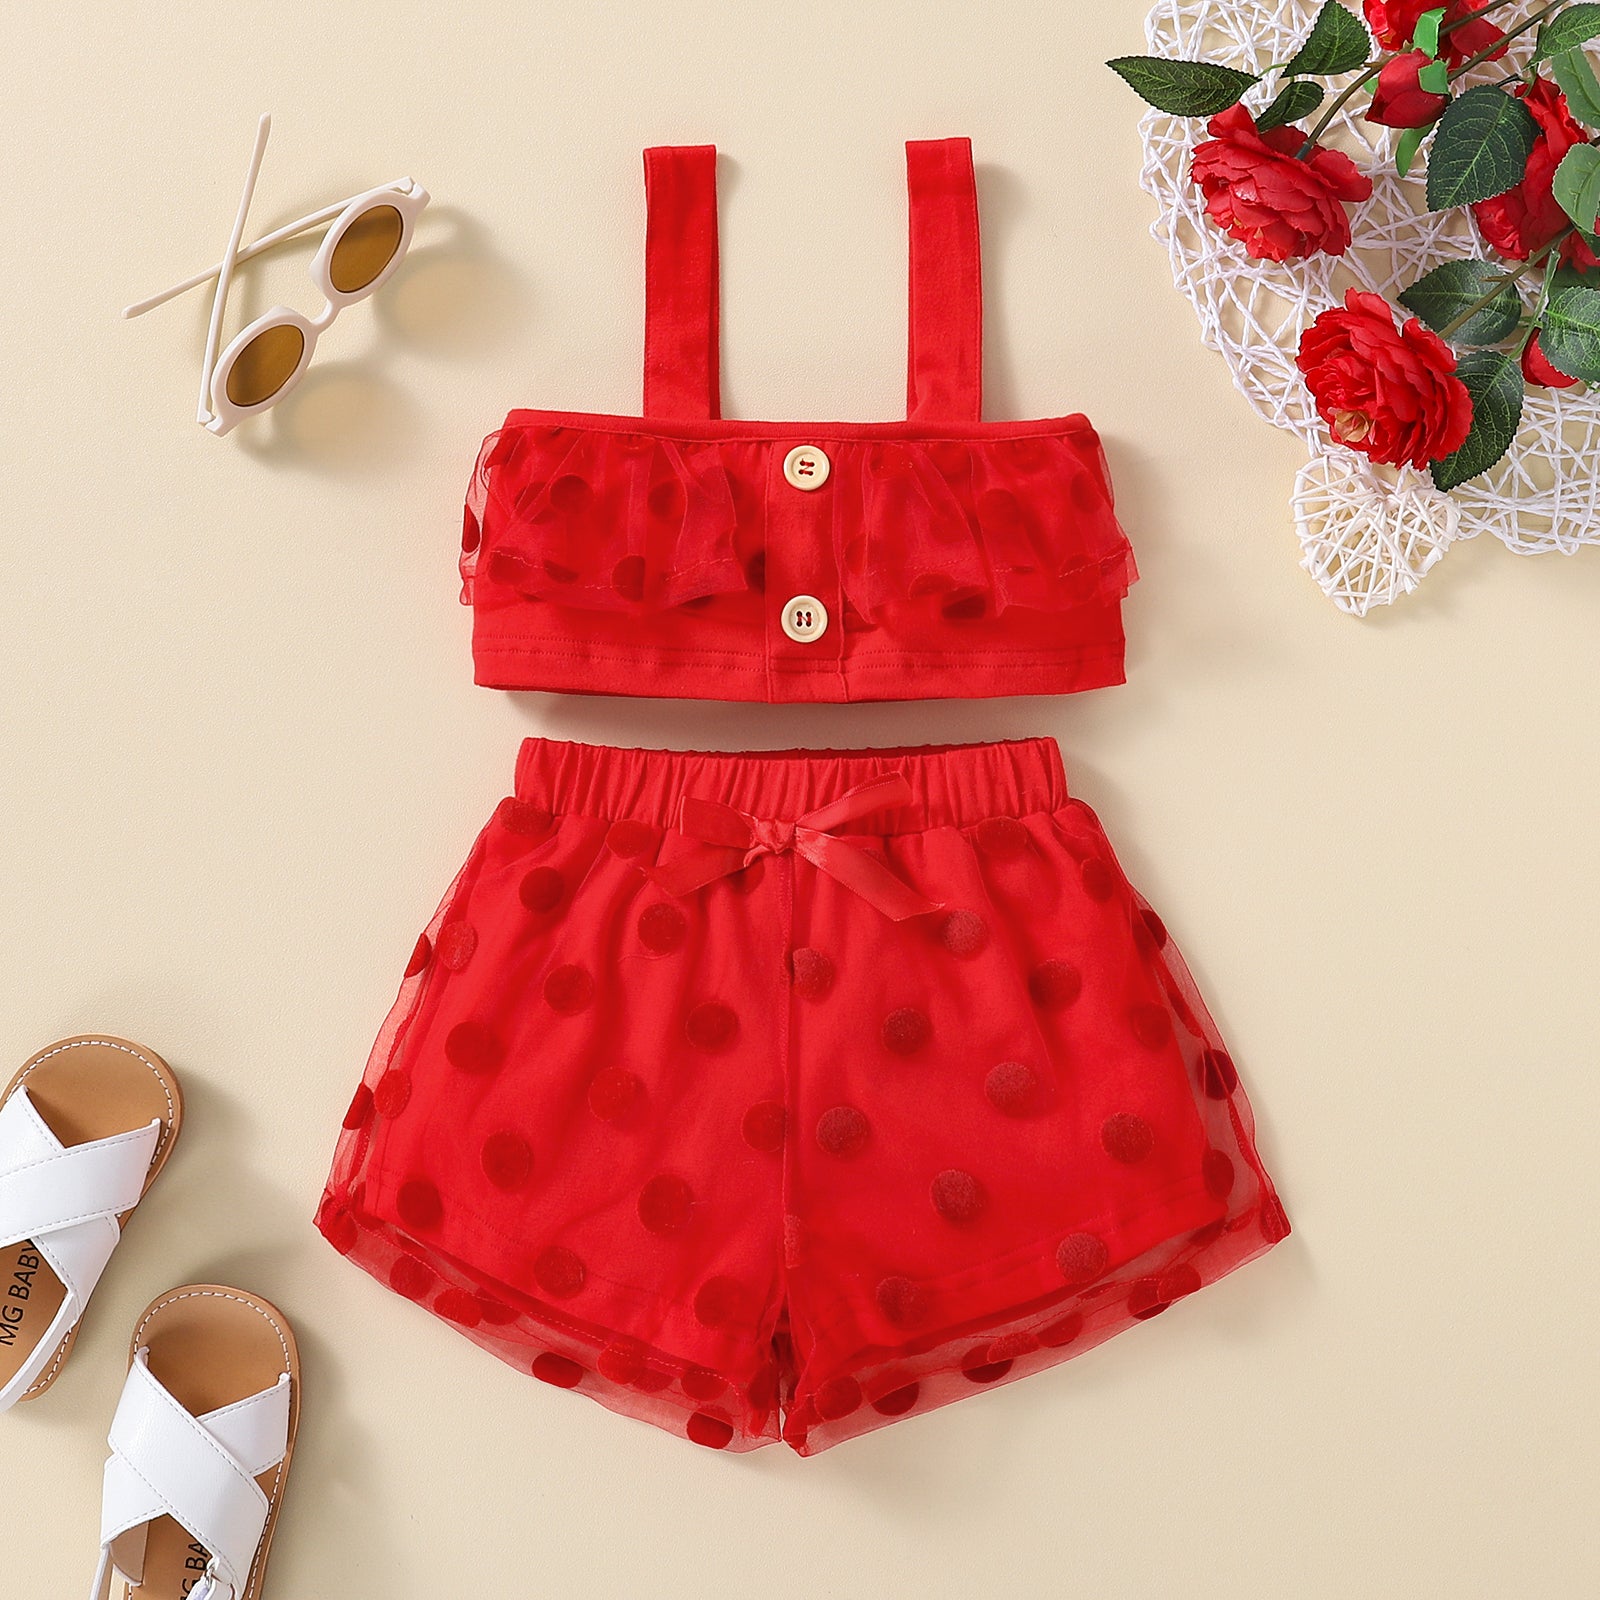 Lady in Red Short Set